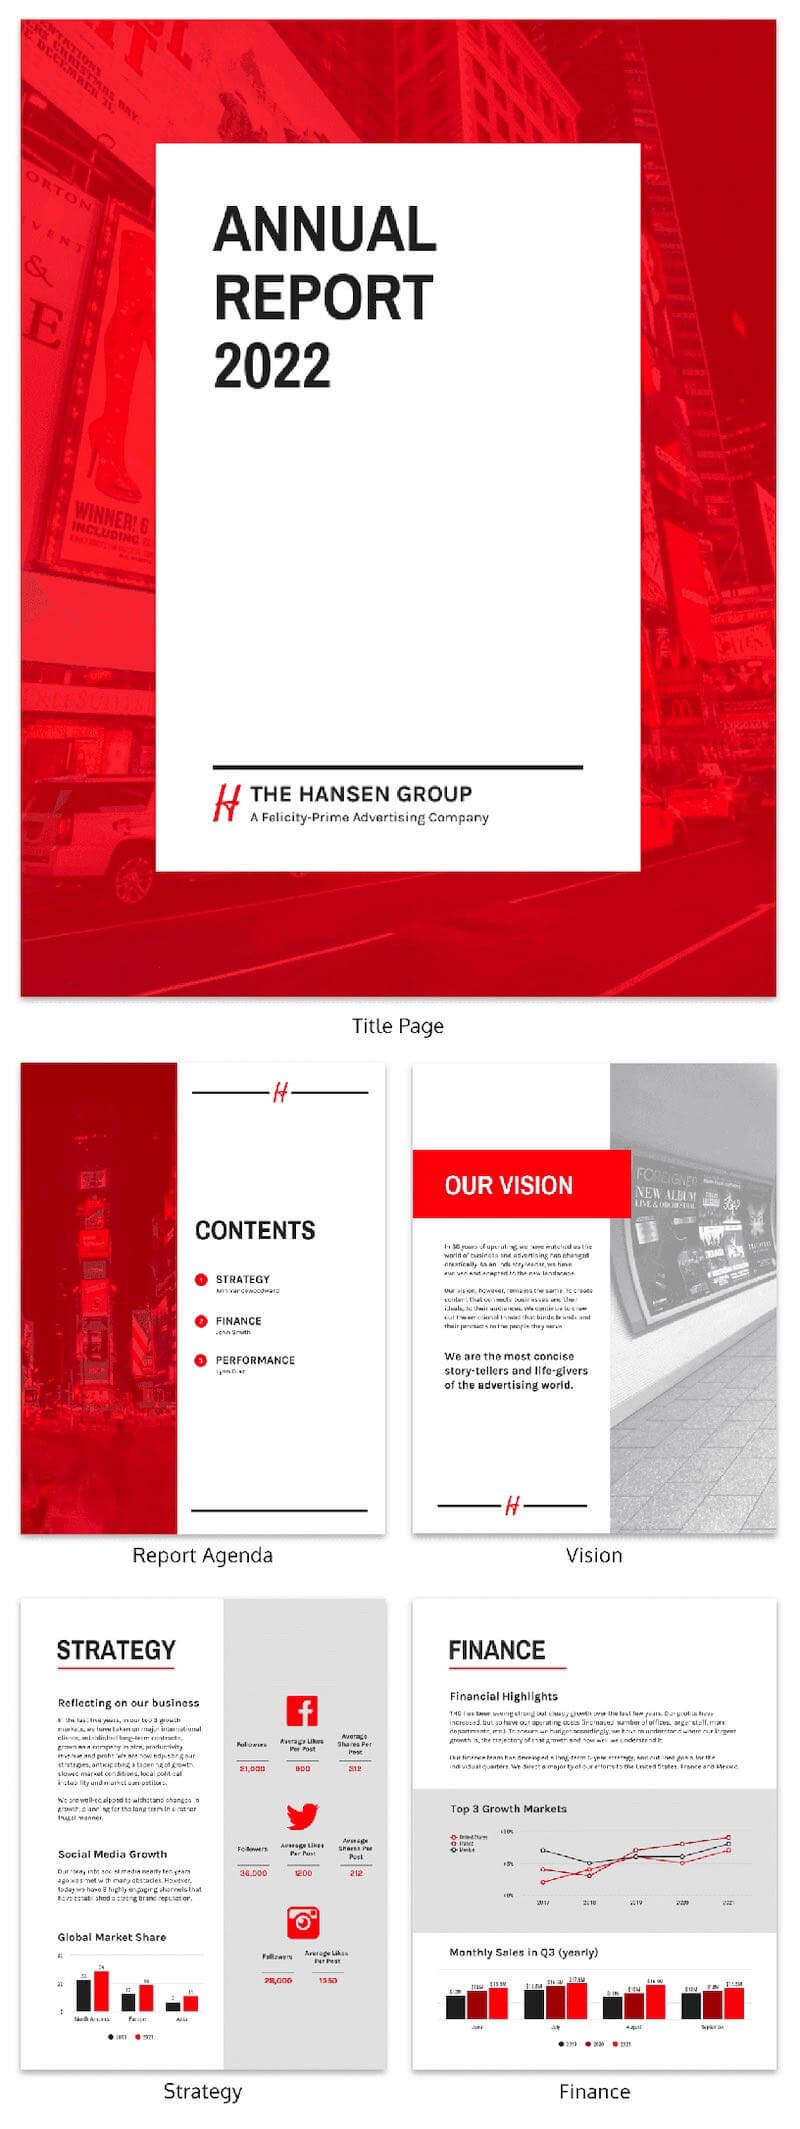 55-customizable-annual-report-design-templates-examples-tips-with